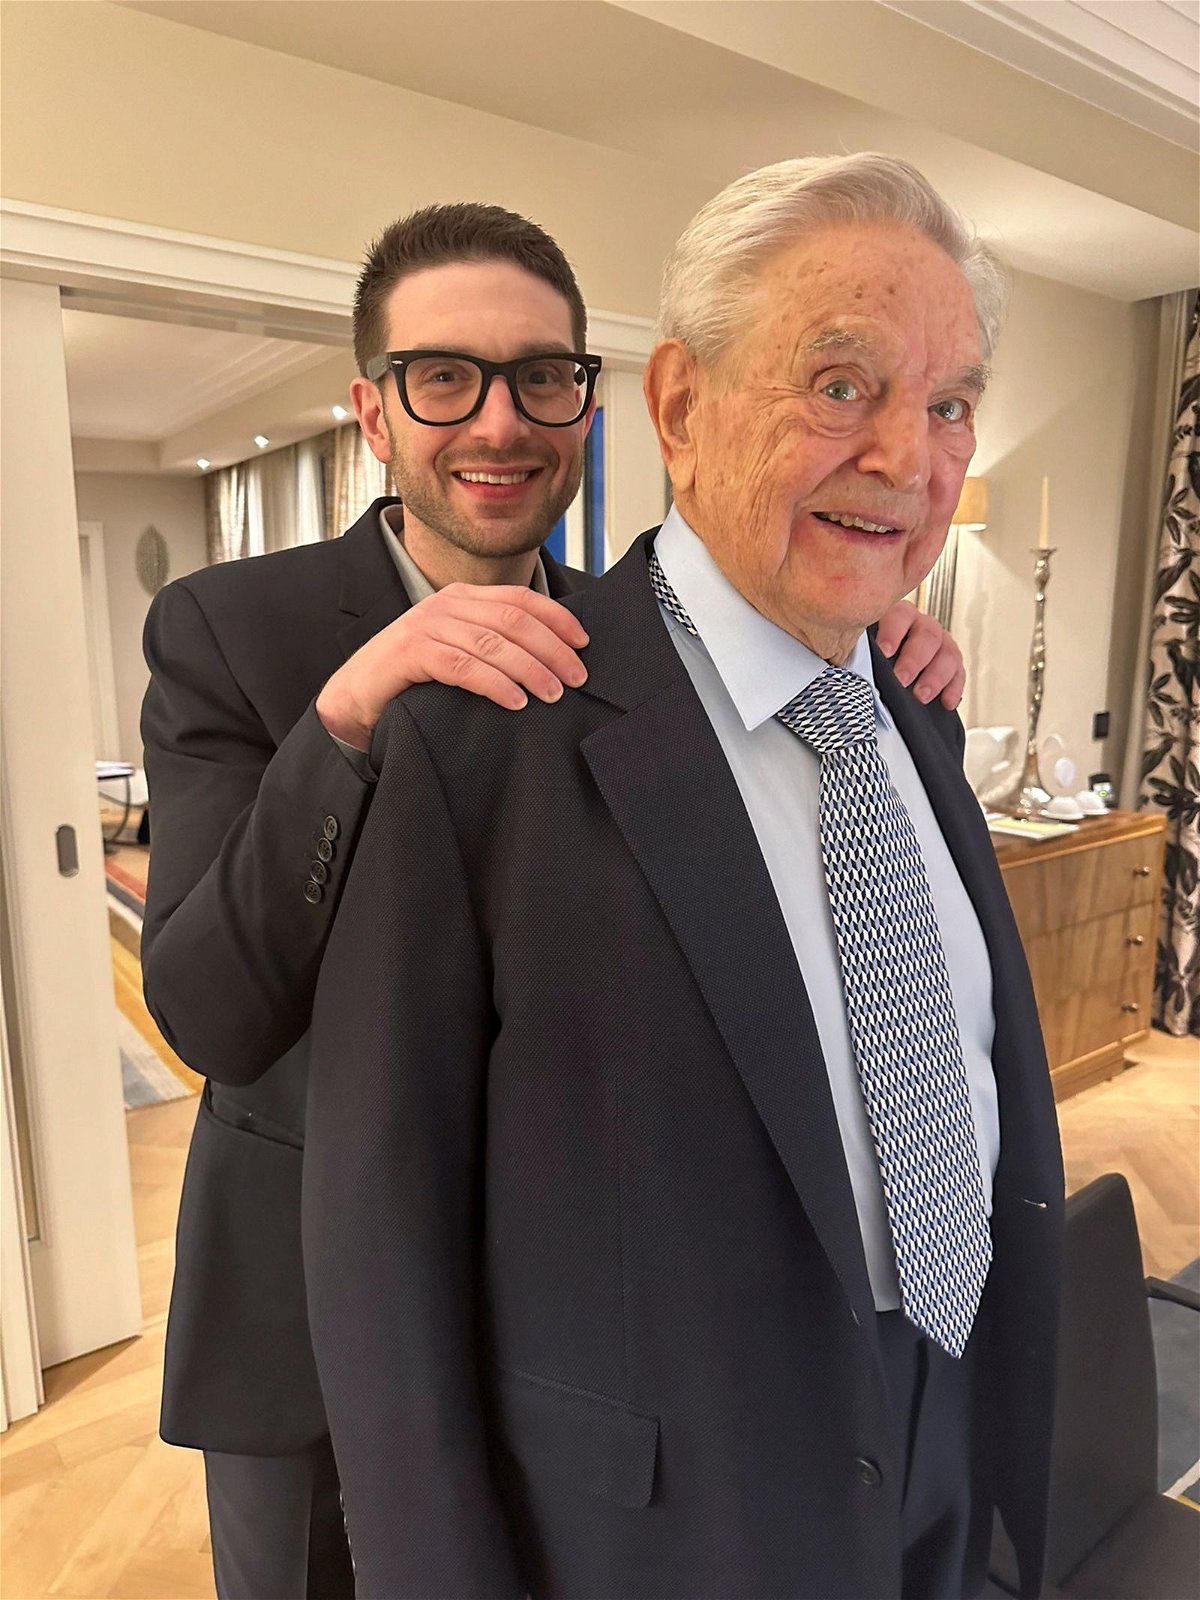 <i>Alex Soros/Twitter/Reuters</i><br/>Billionaire George Soros has tapped his 37-year old son Alexander Soros to lead his charitable foundation and political action committee